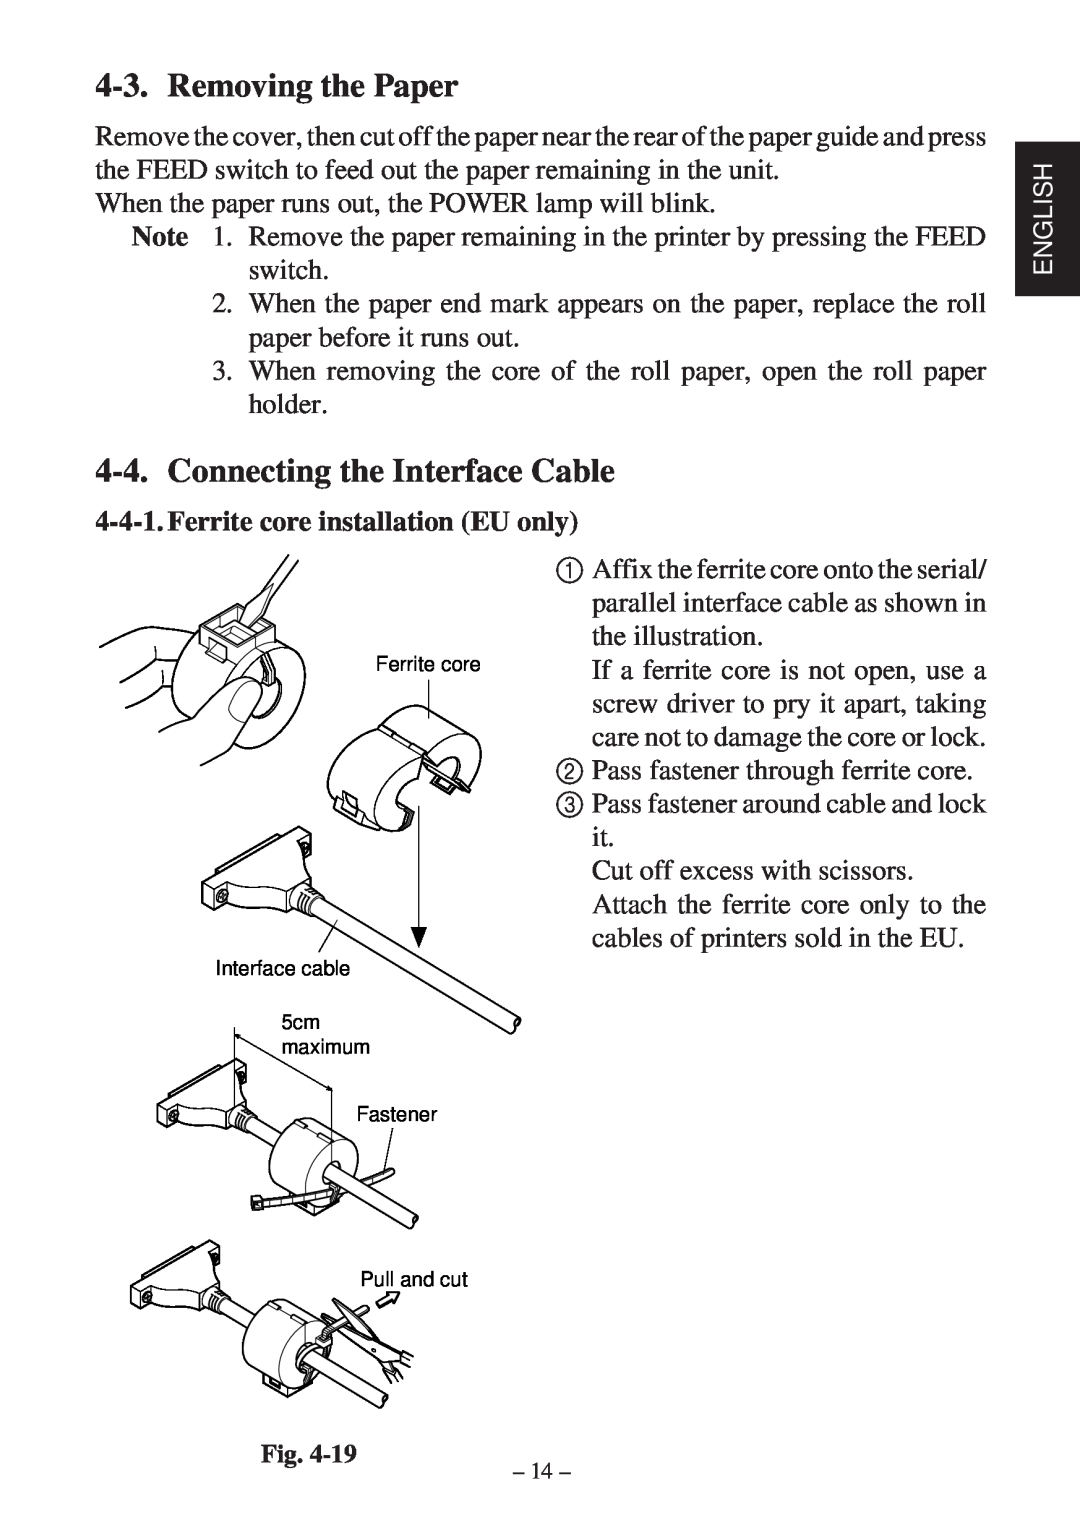 Star Micronics SP200F user manual Removing the Paper, Connecting the Interface Cable, Ferrite core installation EU only 